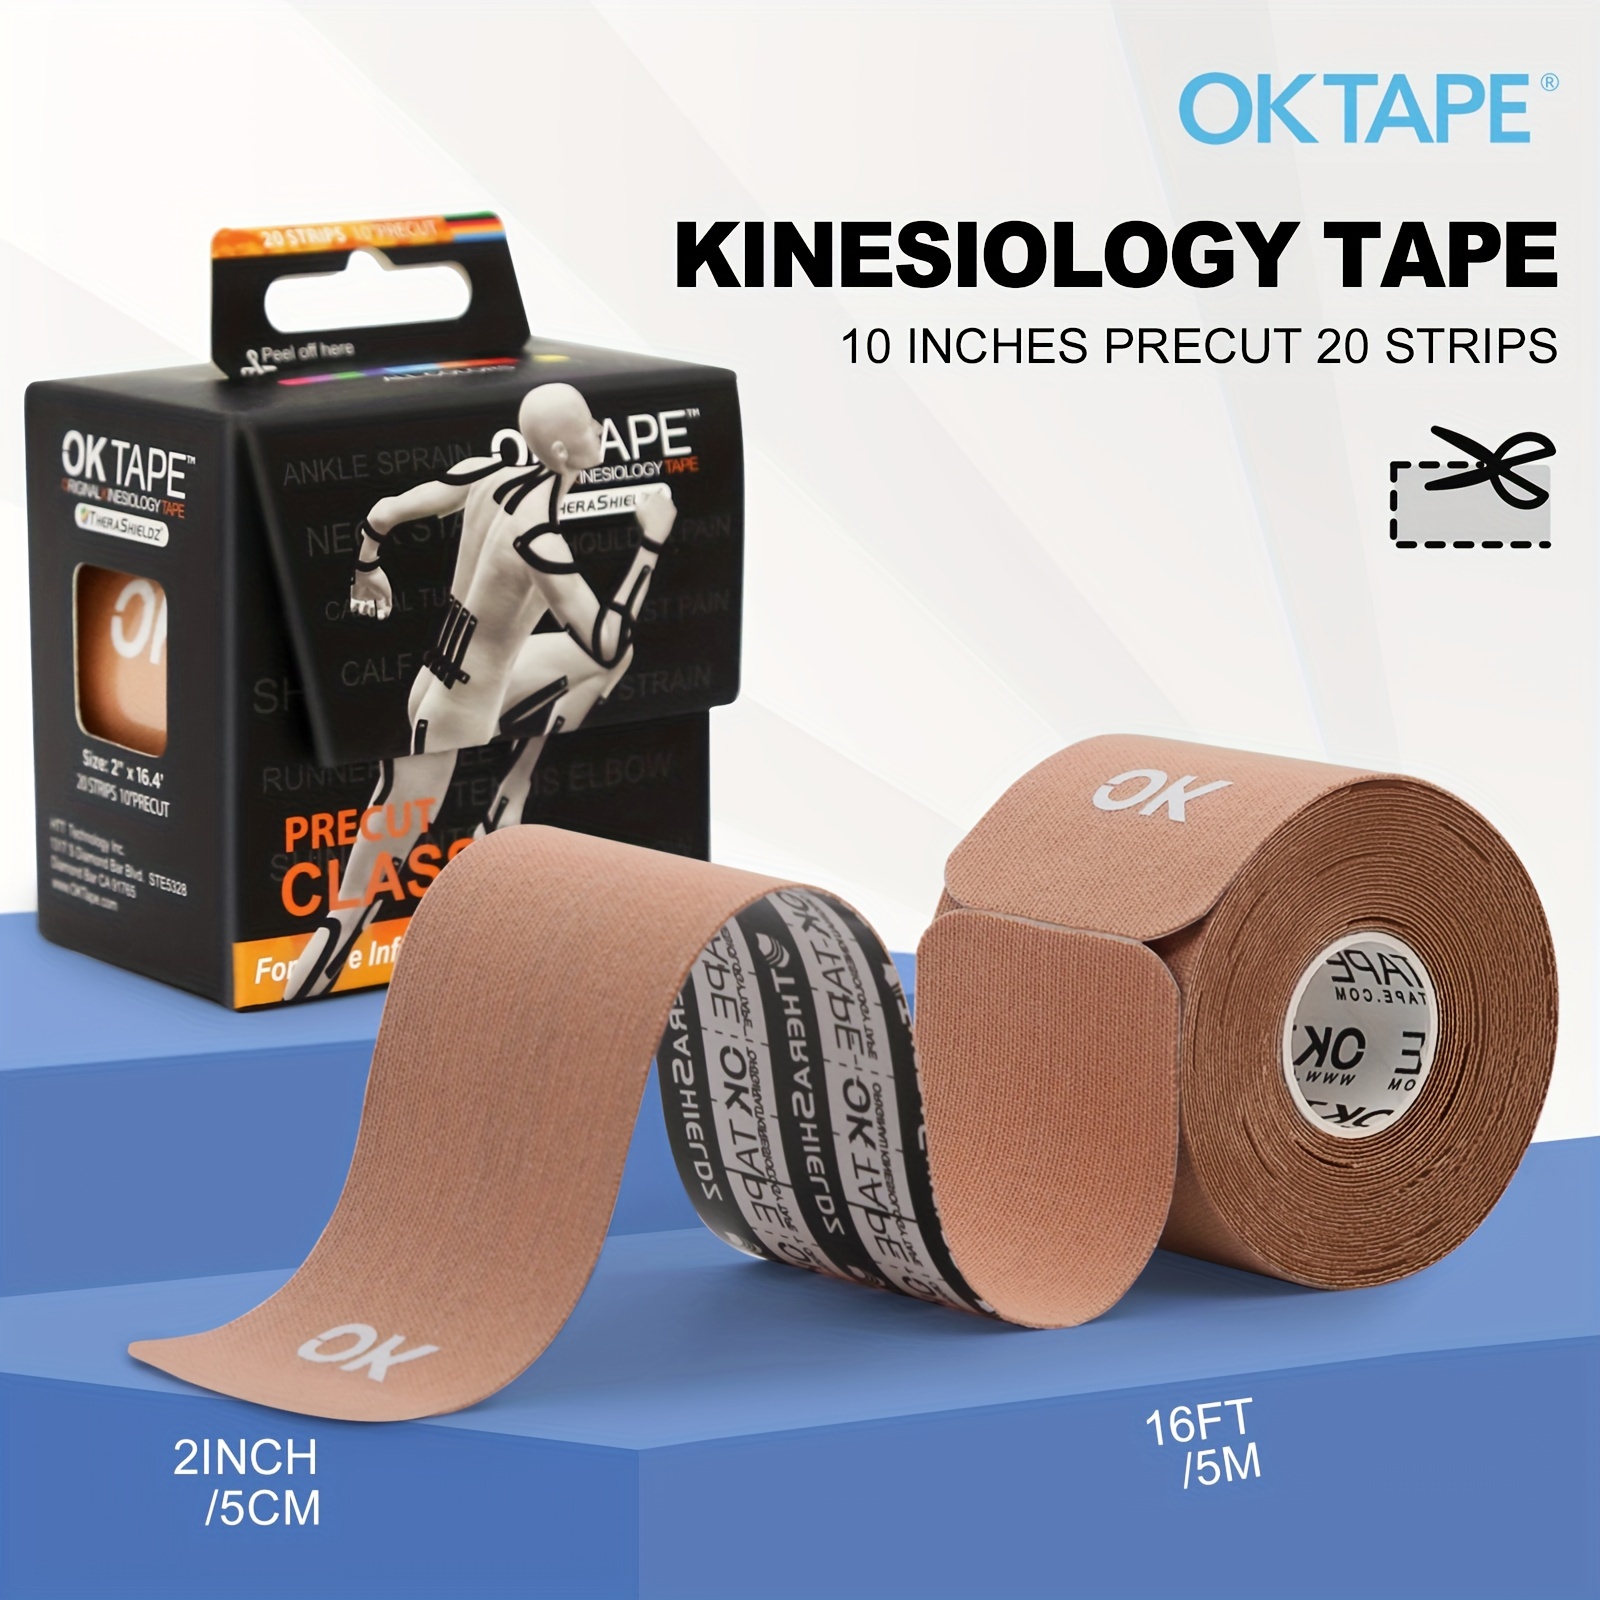 OK TAPE PRO Kinesiology Tape, 2inch x Long Roll 16ft Free Cut Tape, Elastic  Athletic Tape Therapeutic Latex Free, Beige+Beige